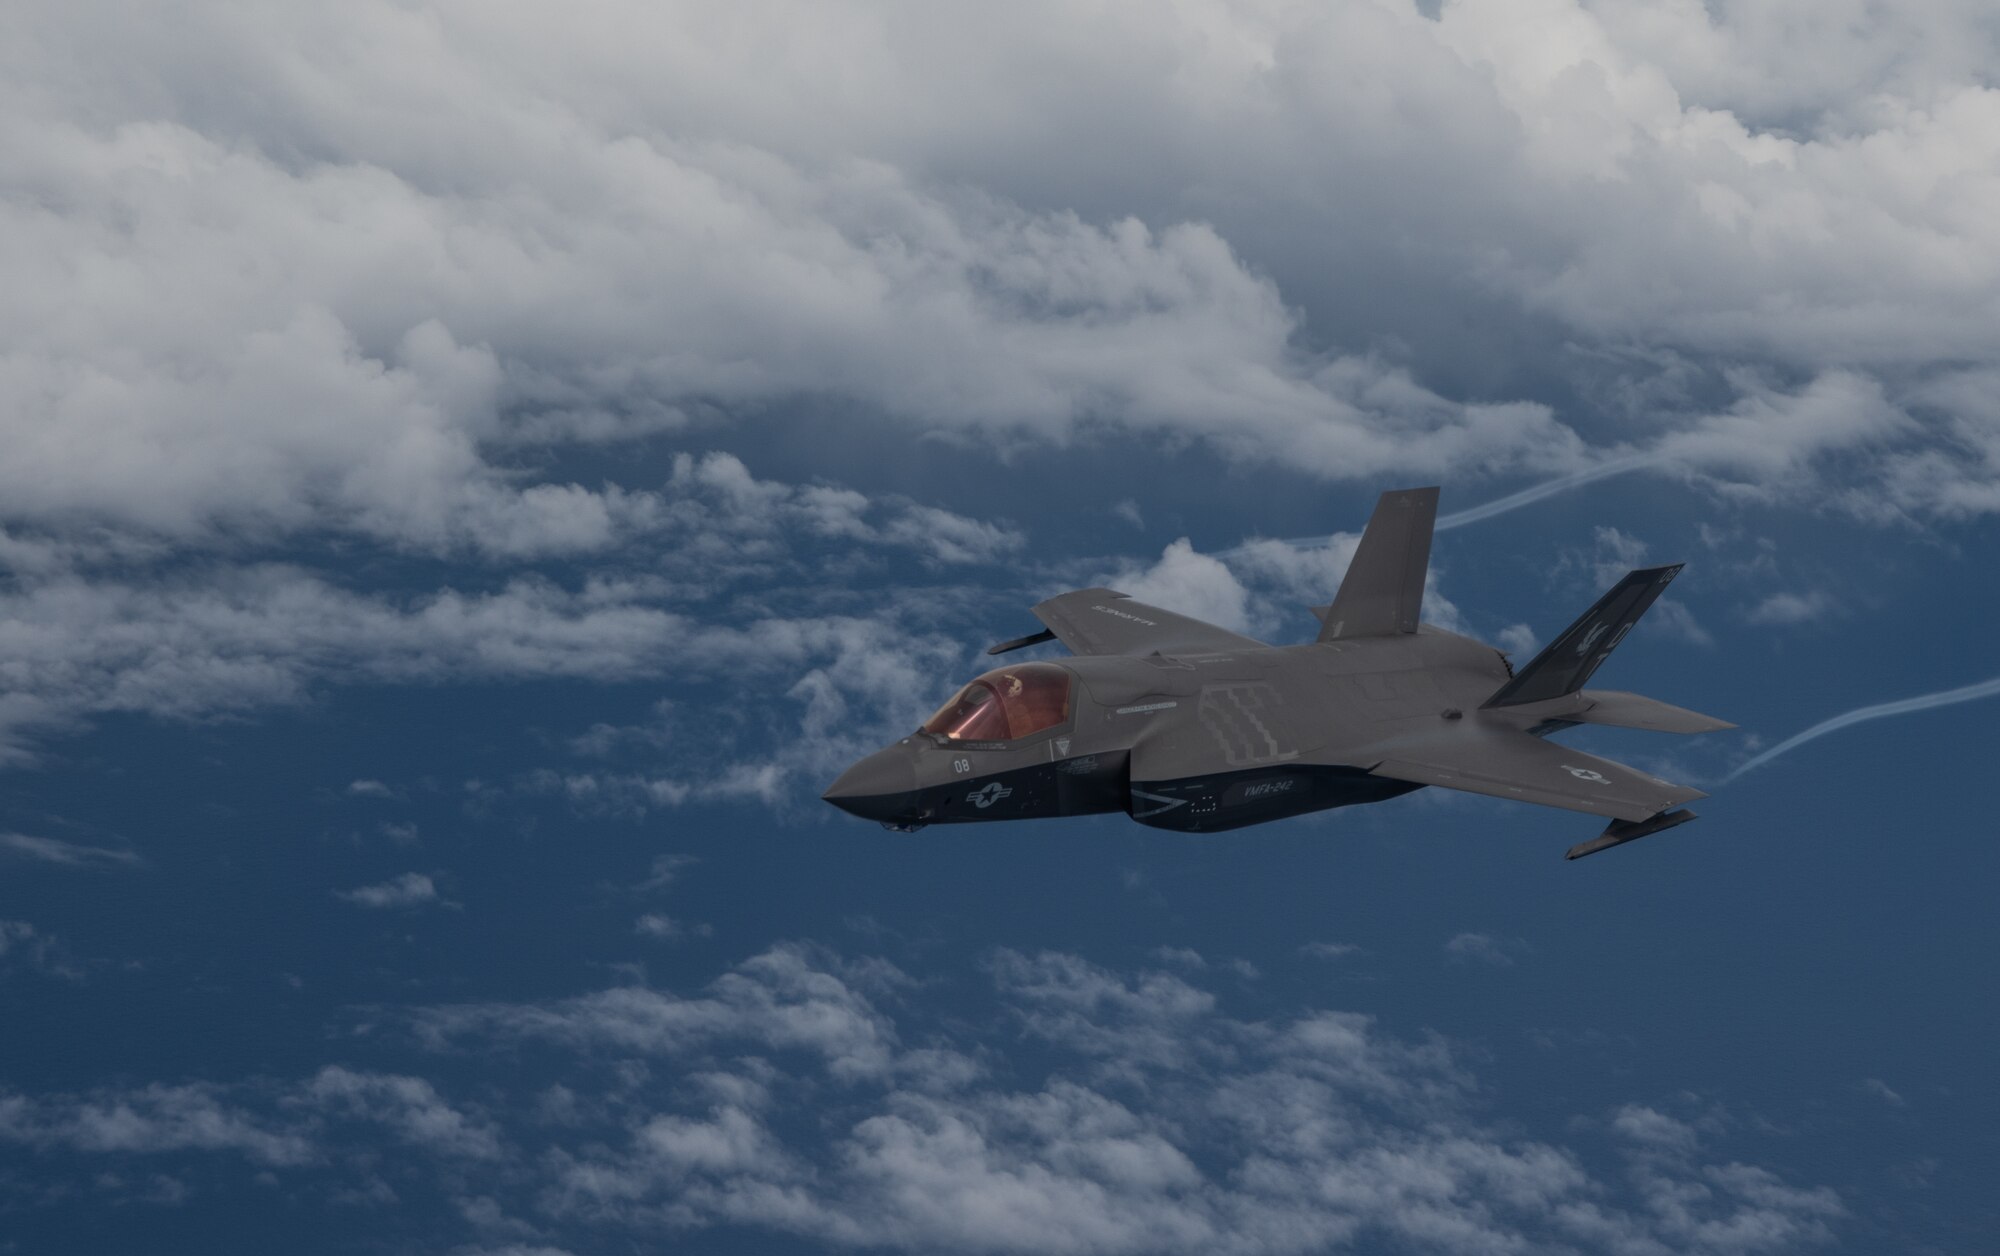 A U.S. Marine Corps F-35B Lightning II, Marine Fighter Attack Squadron based out of Marine Corps Air Station MCAS Iwakuni, Japan breaks away after receiving fuel from a KC-135 Stratotanker assigned to the 909th Air Refueling Squadron, Kadena Air Base, Japan during a Large Scale Global Exercise 21 mission over the western Pacific Ocean, Aug. 18, 2021. LSGE21 contributes to the security of strategic lines of communications in the Indo-Pacific region, which benefits nations across the globe.  (U.S. Air Force photo by Tech. Sgt. Micaiah Anthony)